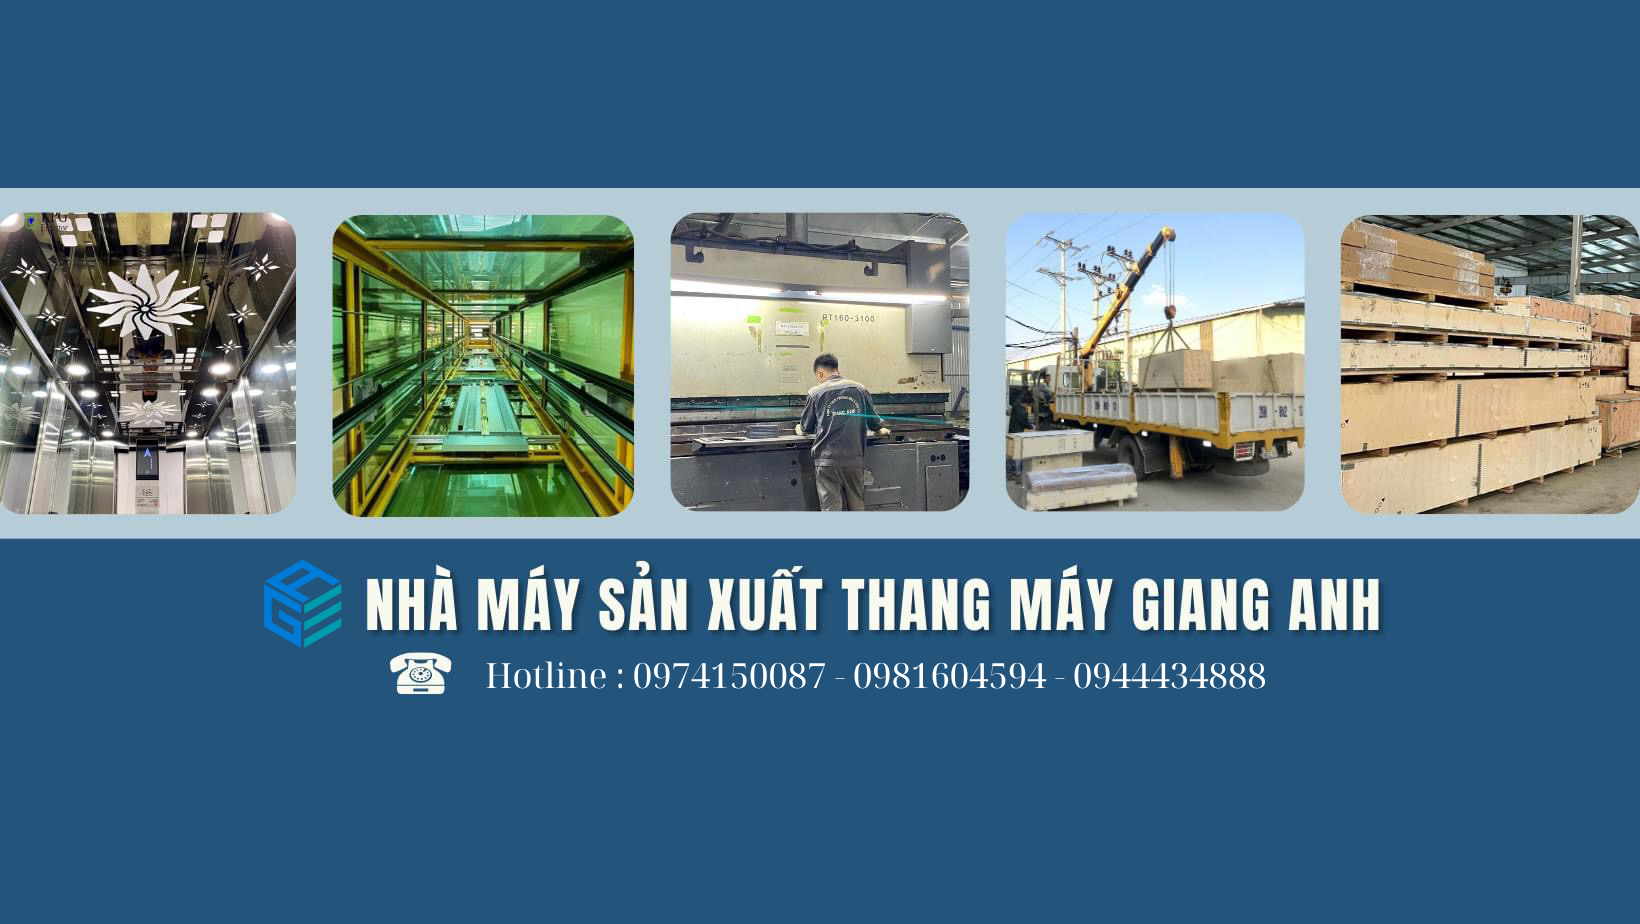 Cover image for Công Ty Sản Xuất Thang Máy Giang Anh